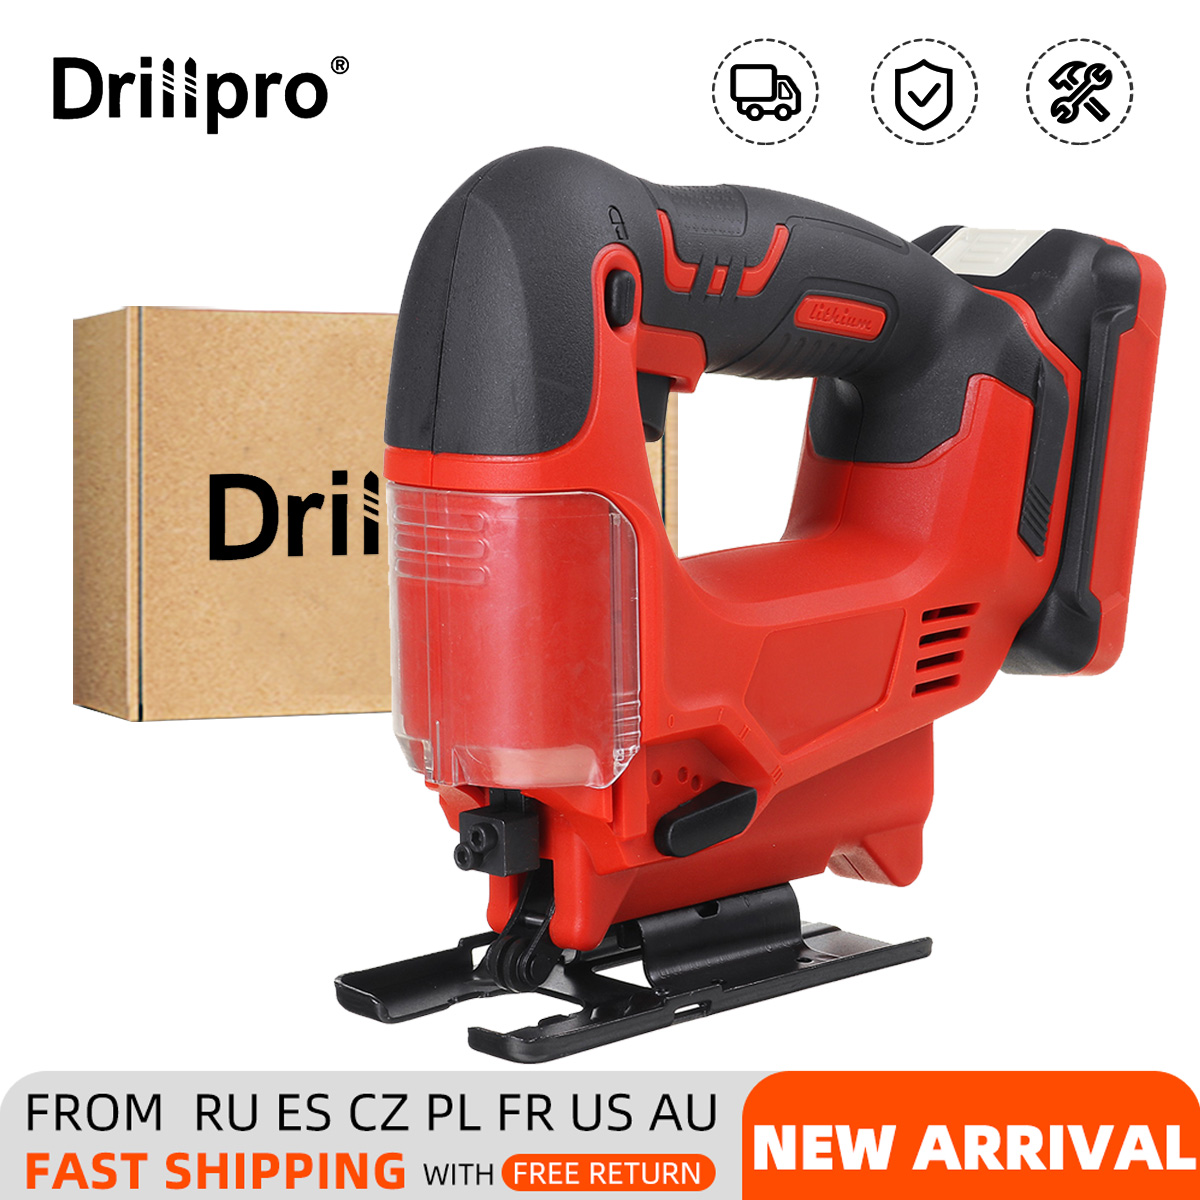 Drillpro-2900RPM-Electric-Jig-Saw-Cordless-Quick-Blade-Change-Saw-Power-Tool-4-Adjustable-Cutting-An-1859334-5